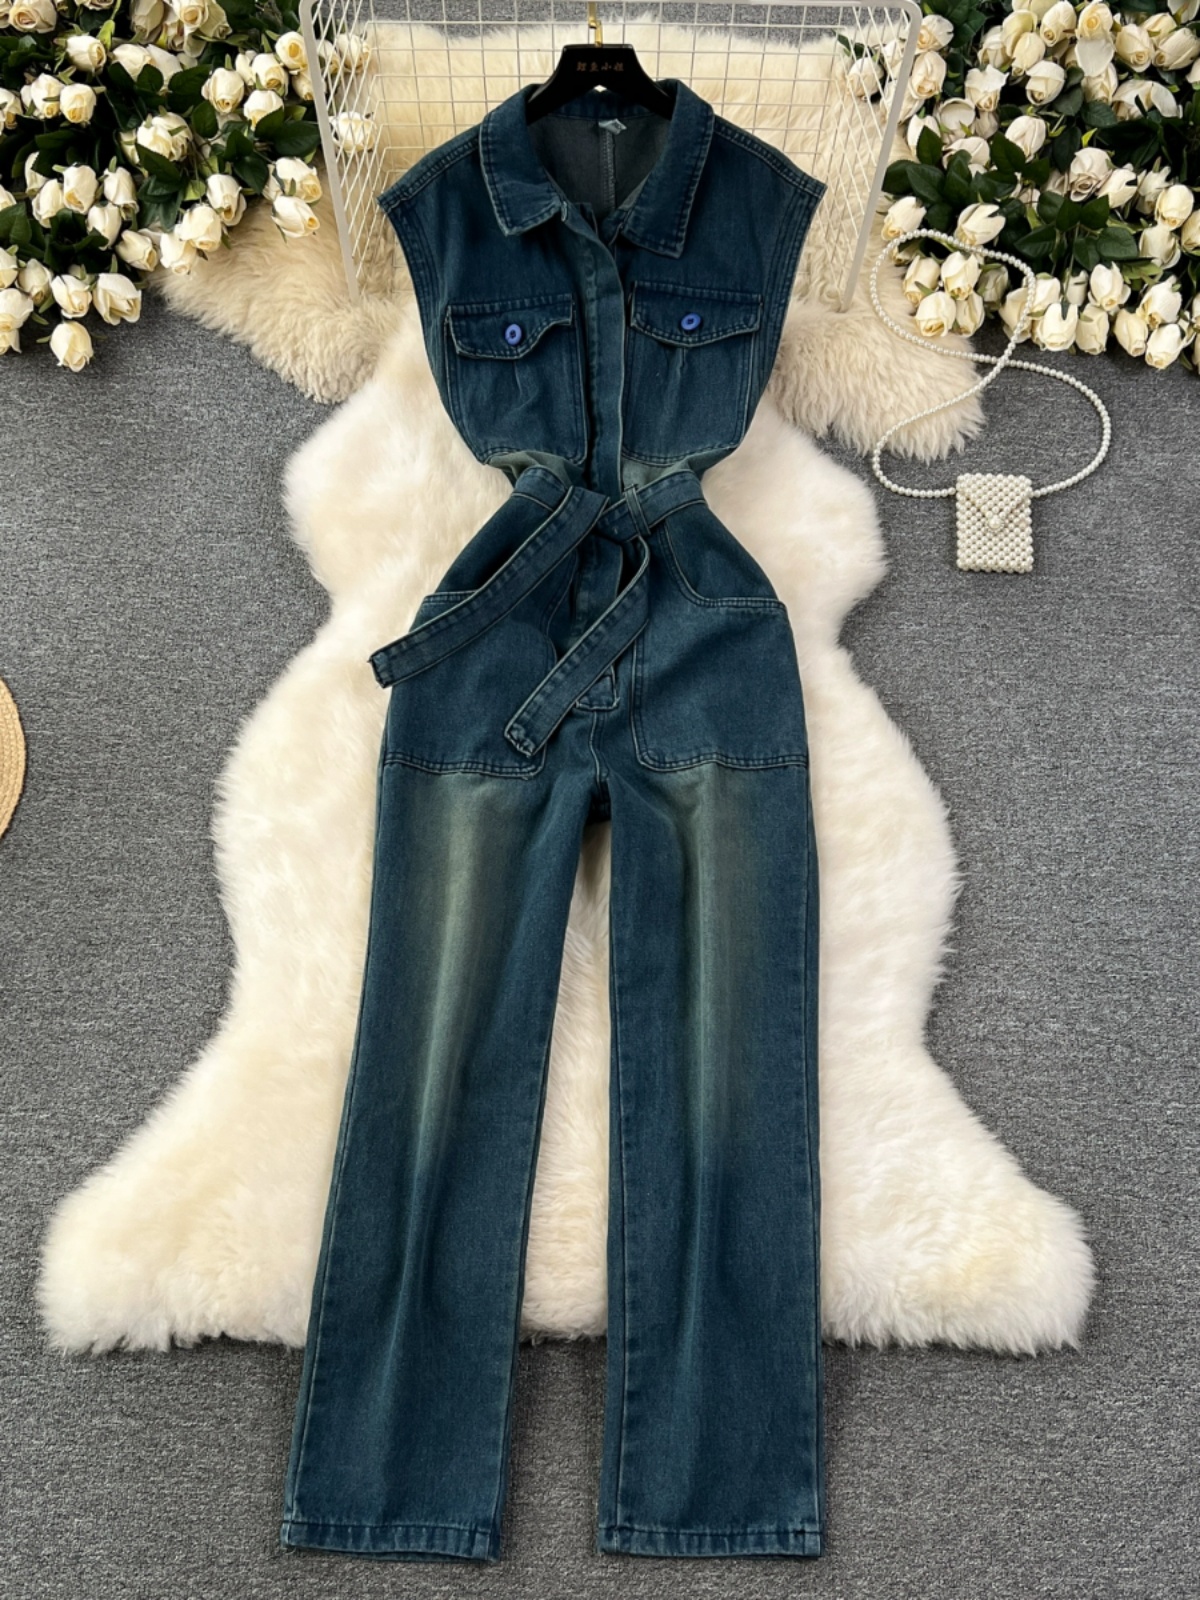 Chic niche Korean retro fashion jumpsuit, women's cool Sa design, slim waist, washed and distressed jeans